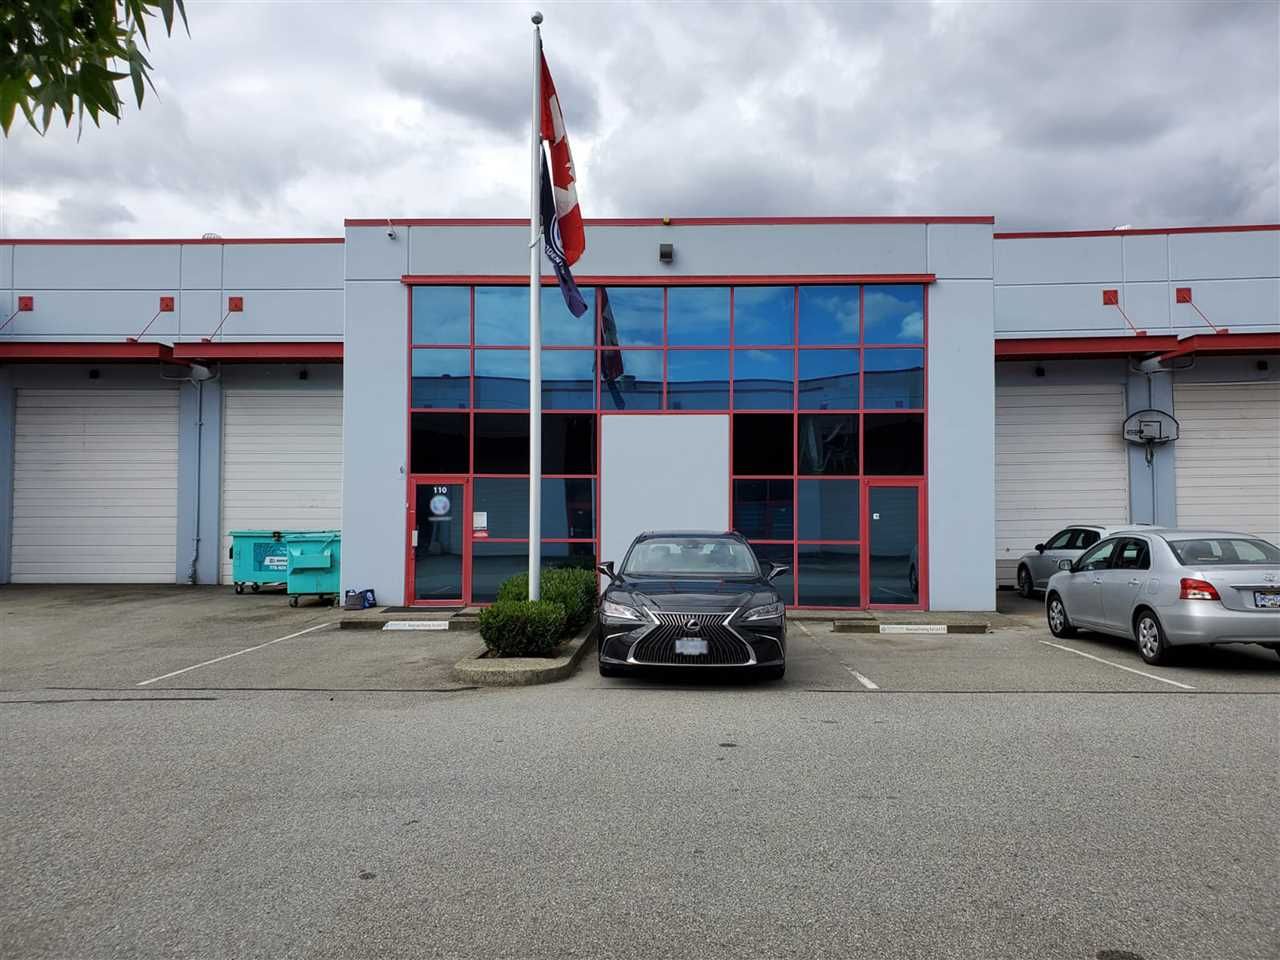 Main Photo: 110 42 FAWCETT ROAD in Coquitlam: Cape Horn Industrial for sale